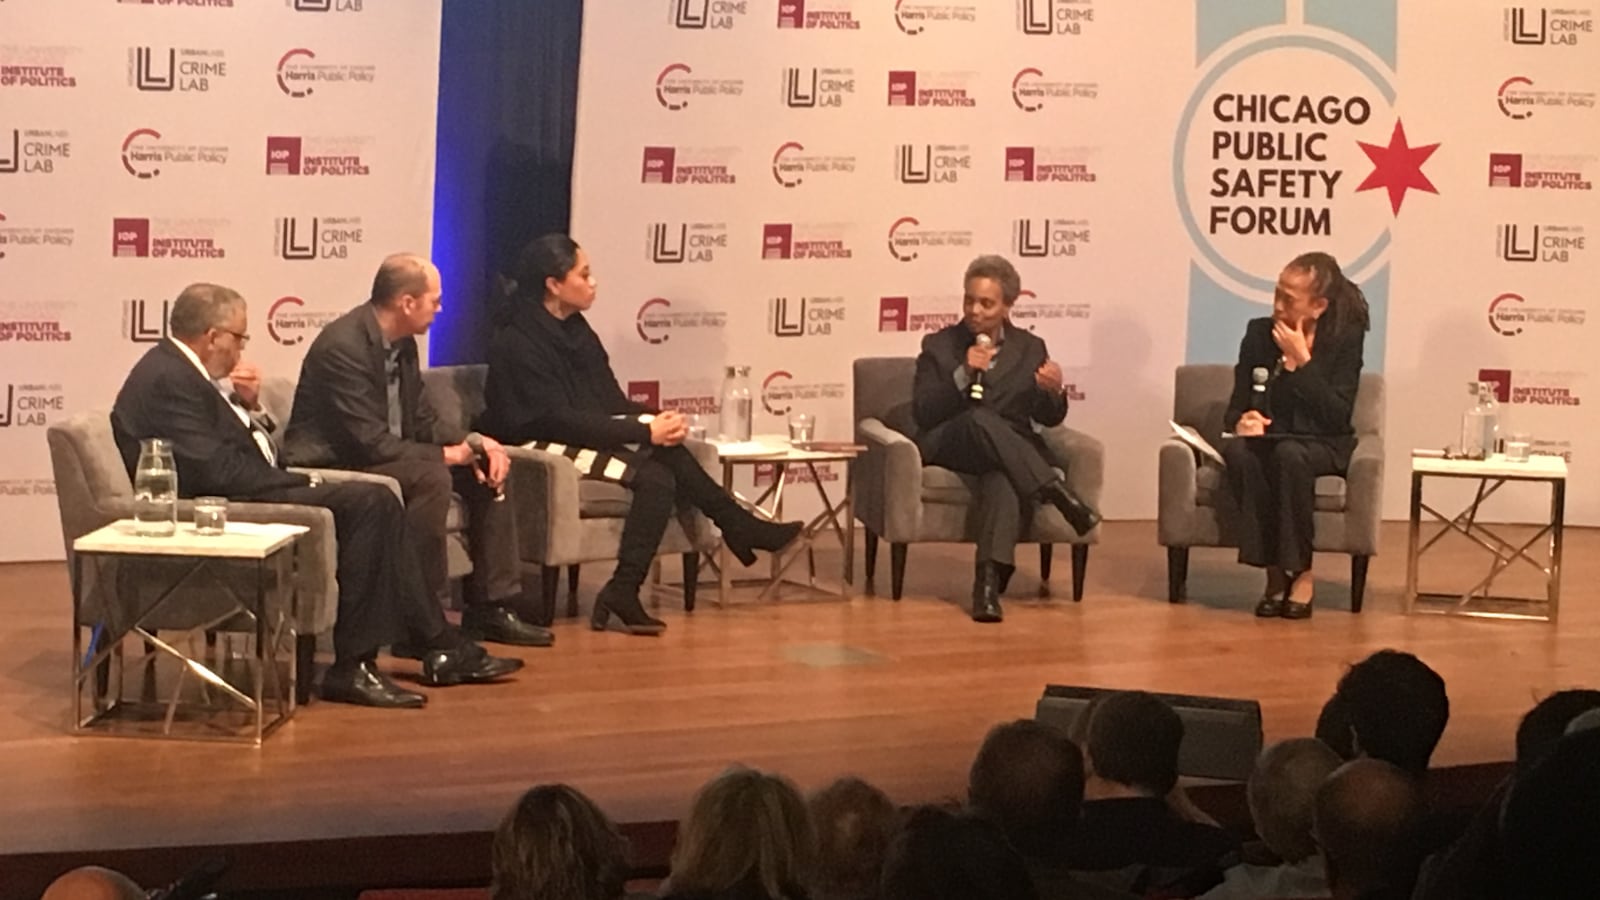 Lori Lightfoot attended a mayoral forum Wednesday focused on public safety, where she floated the idea of using closed schools as police training facilities.